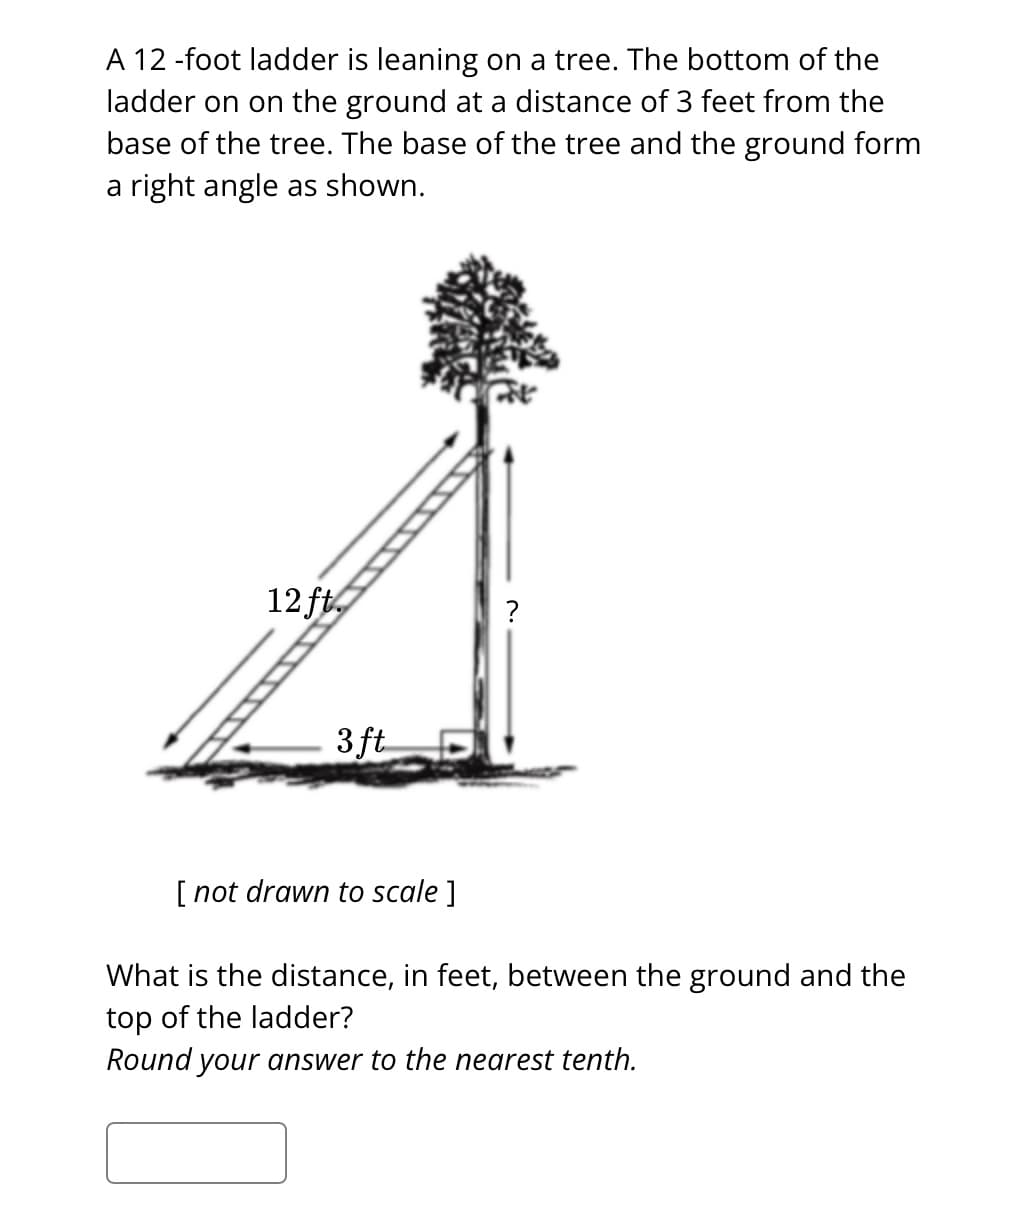 A 12 -foot ladder is leaning on a tree. The bottom of the
ladder on on the ground at a distance of 3 feet from the
base of the tree. The base of the tree and the ground form
a right angle as shown.
12 ft.
3 ft
[ not drawn to scale ]
?
What is the distance, in feet, between the ground and the
top of the ladder?
Round your answer to the nearest tenth.